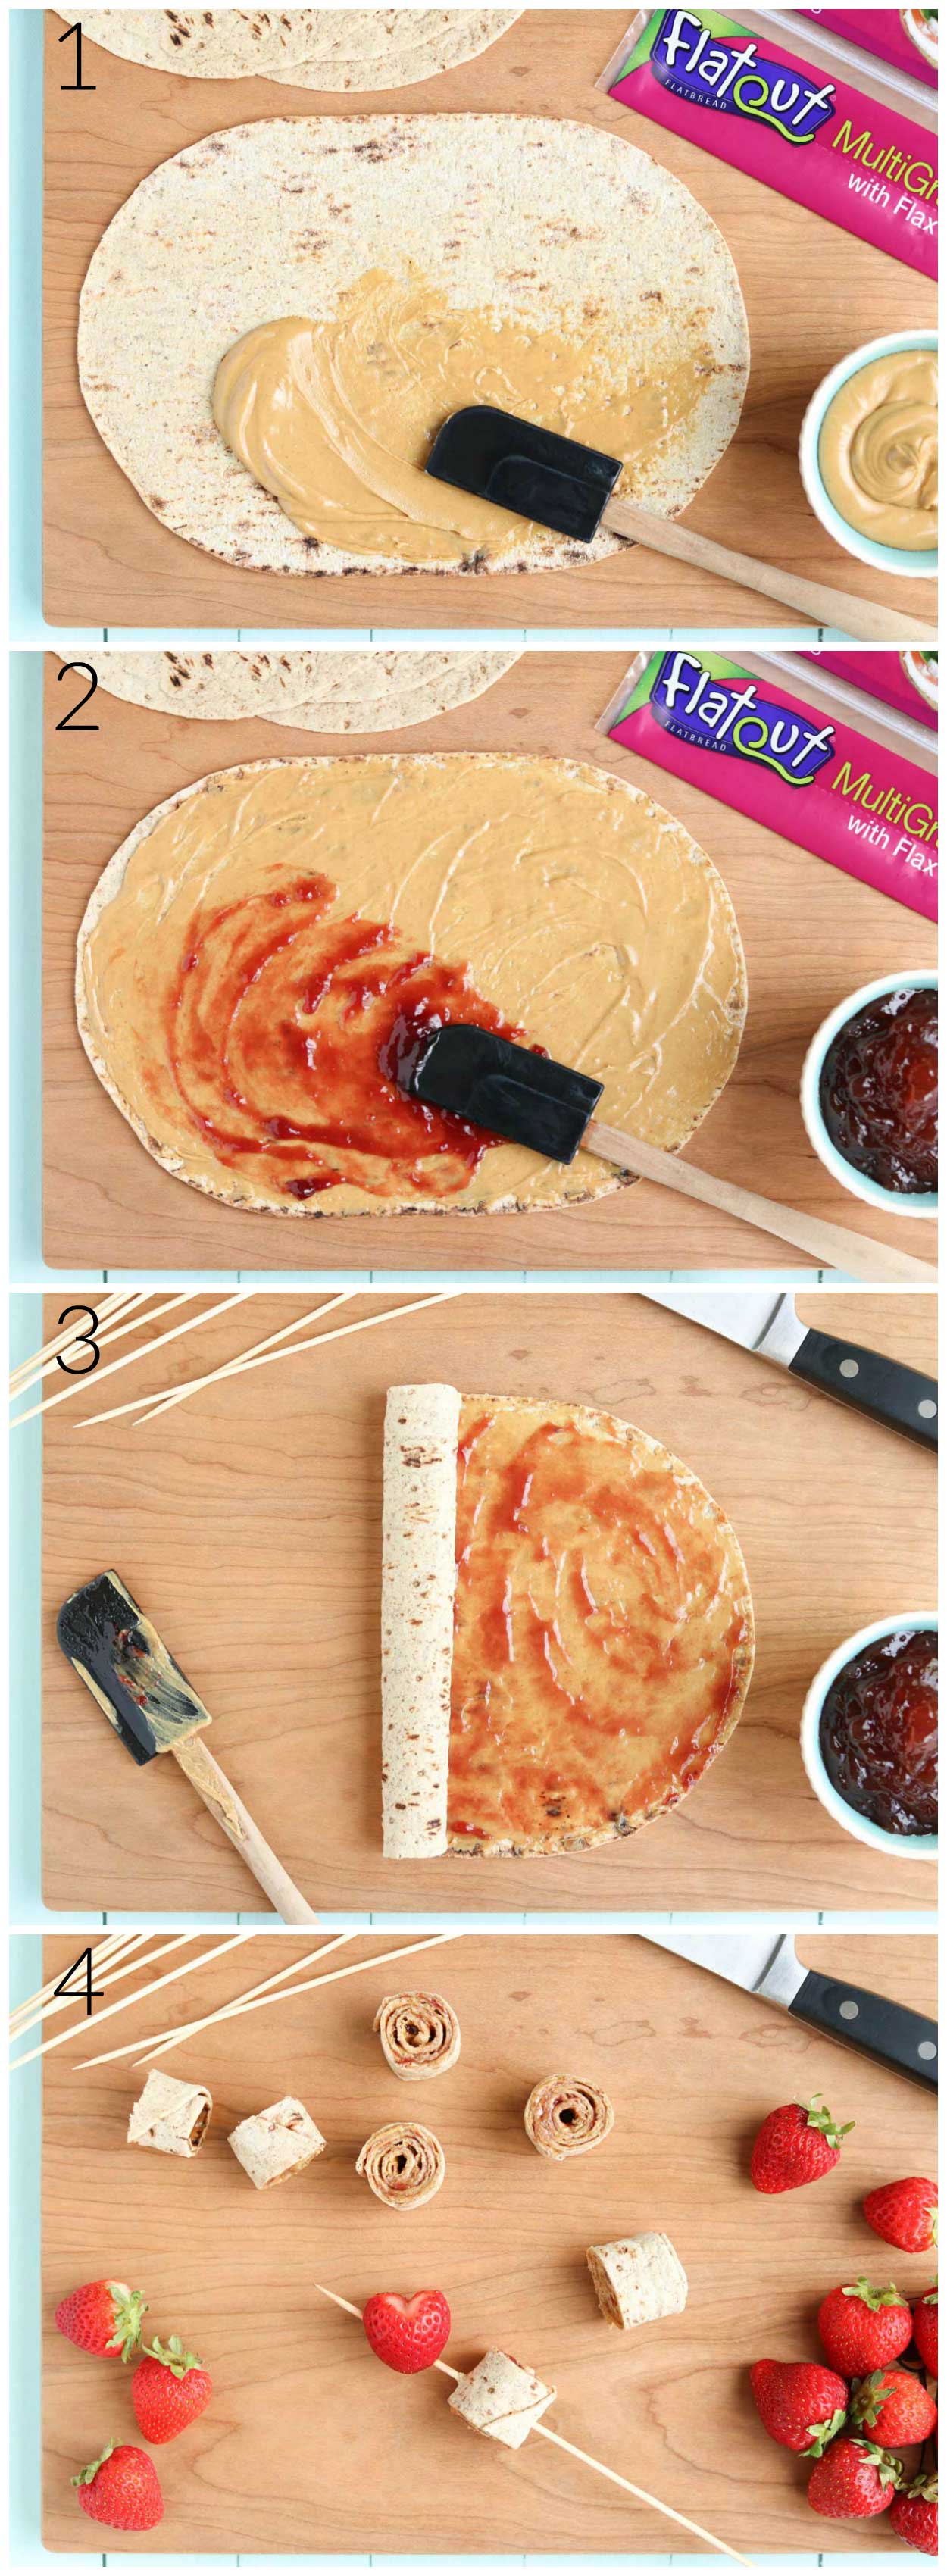 The steps for making these PB&J Pinwheel Sandwich Kabobs are quick and easy – a perfect fast solution for school lunches! After spreading a thin layer of peanut butter and then jelly, you simply roll up the sandwich wrap, cut it into pinwheels, and then thread the sandwich pinwheels onto a skewer along with fruit! Simple but so adorable!